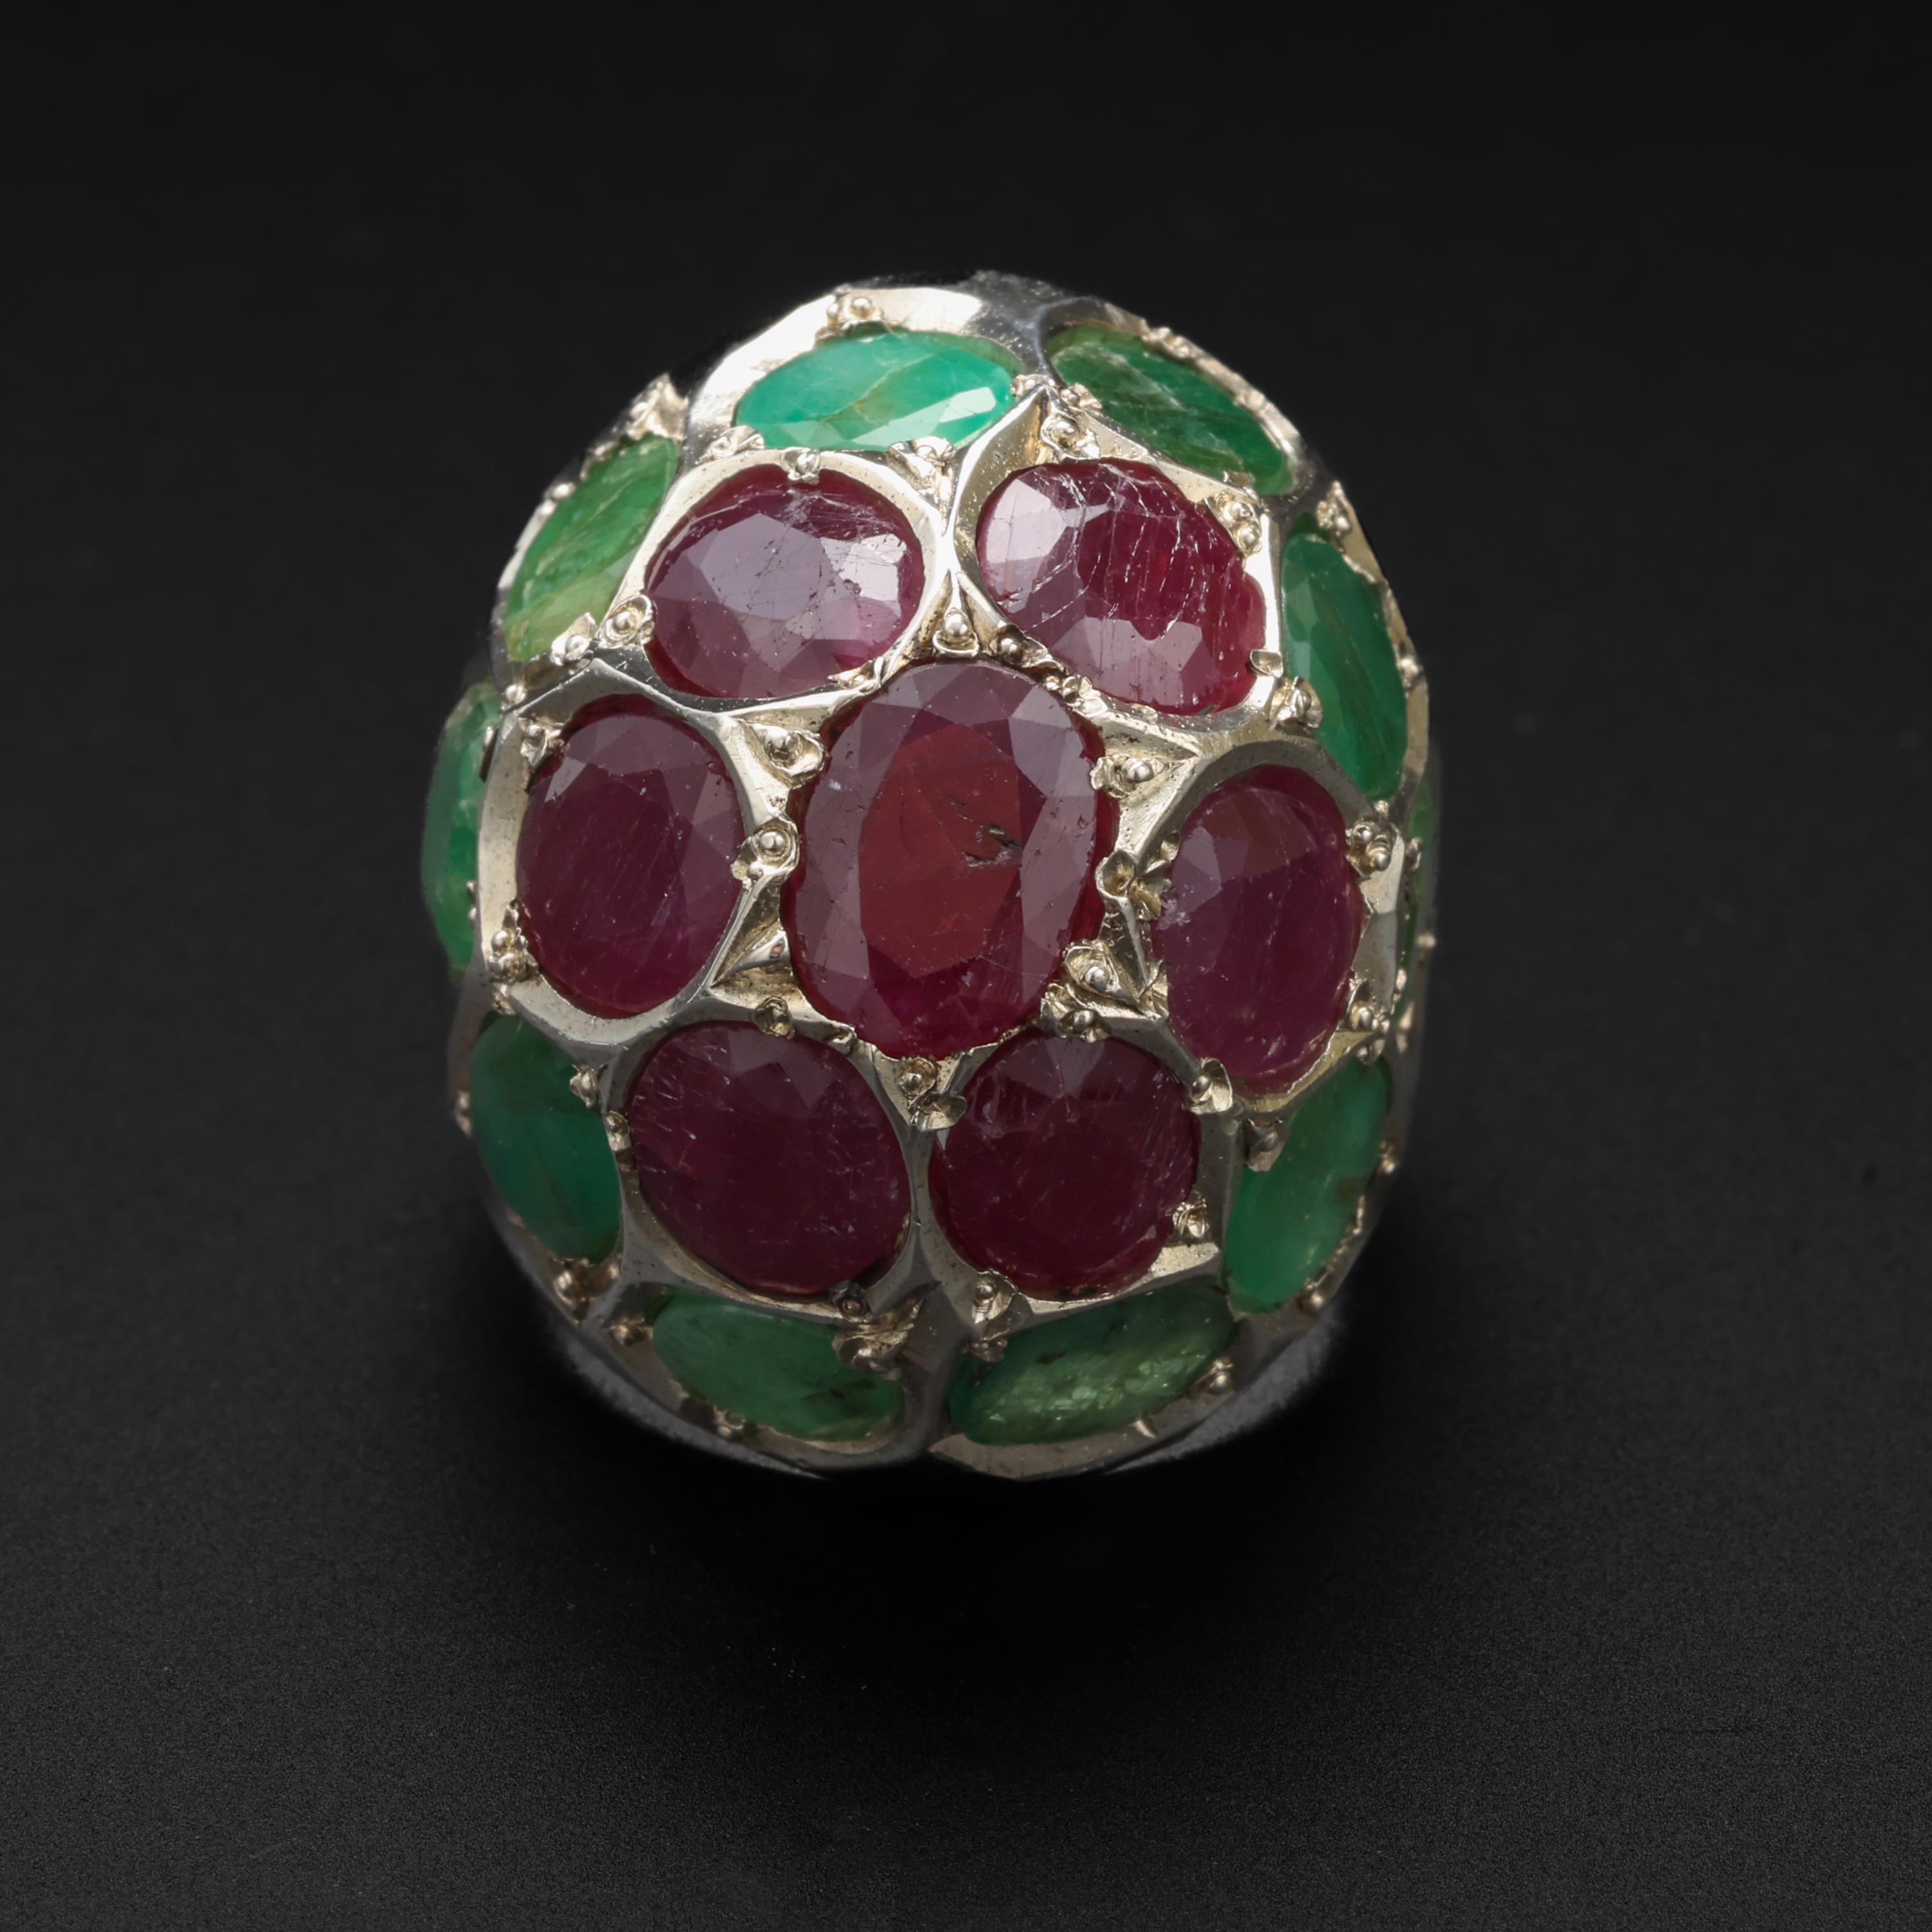 A joy of a ring. Hand-crafted (most likely) in India from 10 natural oval emeralds weighing approximately 12 carats and 7 natural rubies weighing approximately 10.5 carats for a total carat weight of approximately 22.5 carats of earth-mine gems!